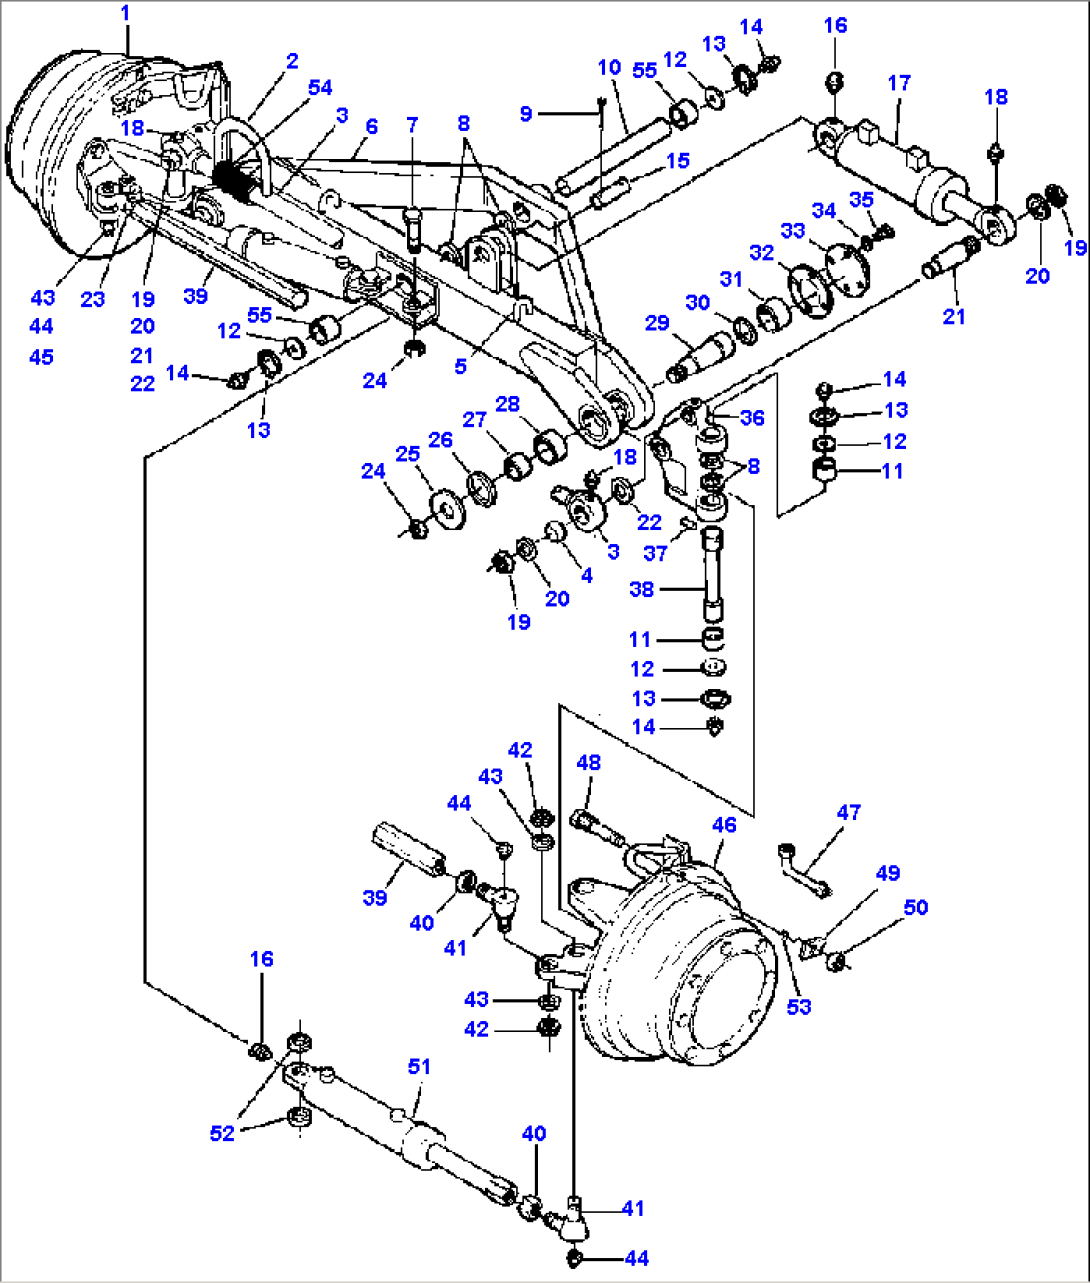 ALL WHEEL DRIVE FRONT AXLE MACHINES WITH FRONT FENDERS